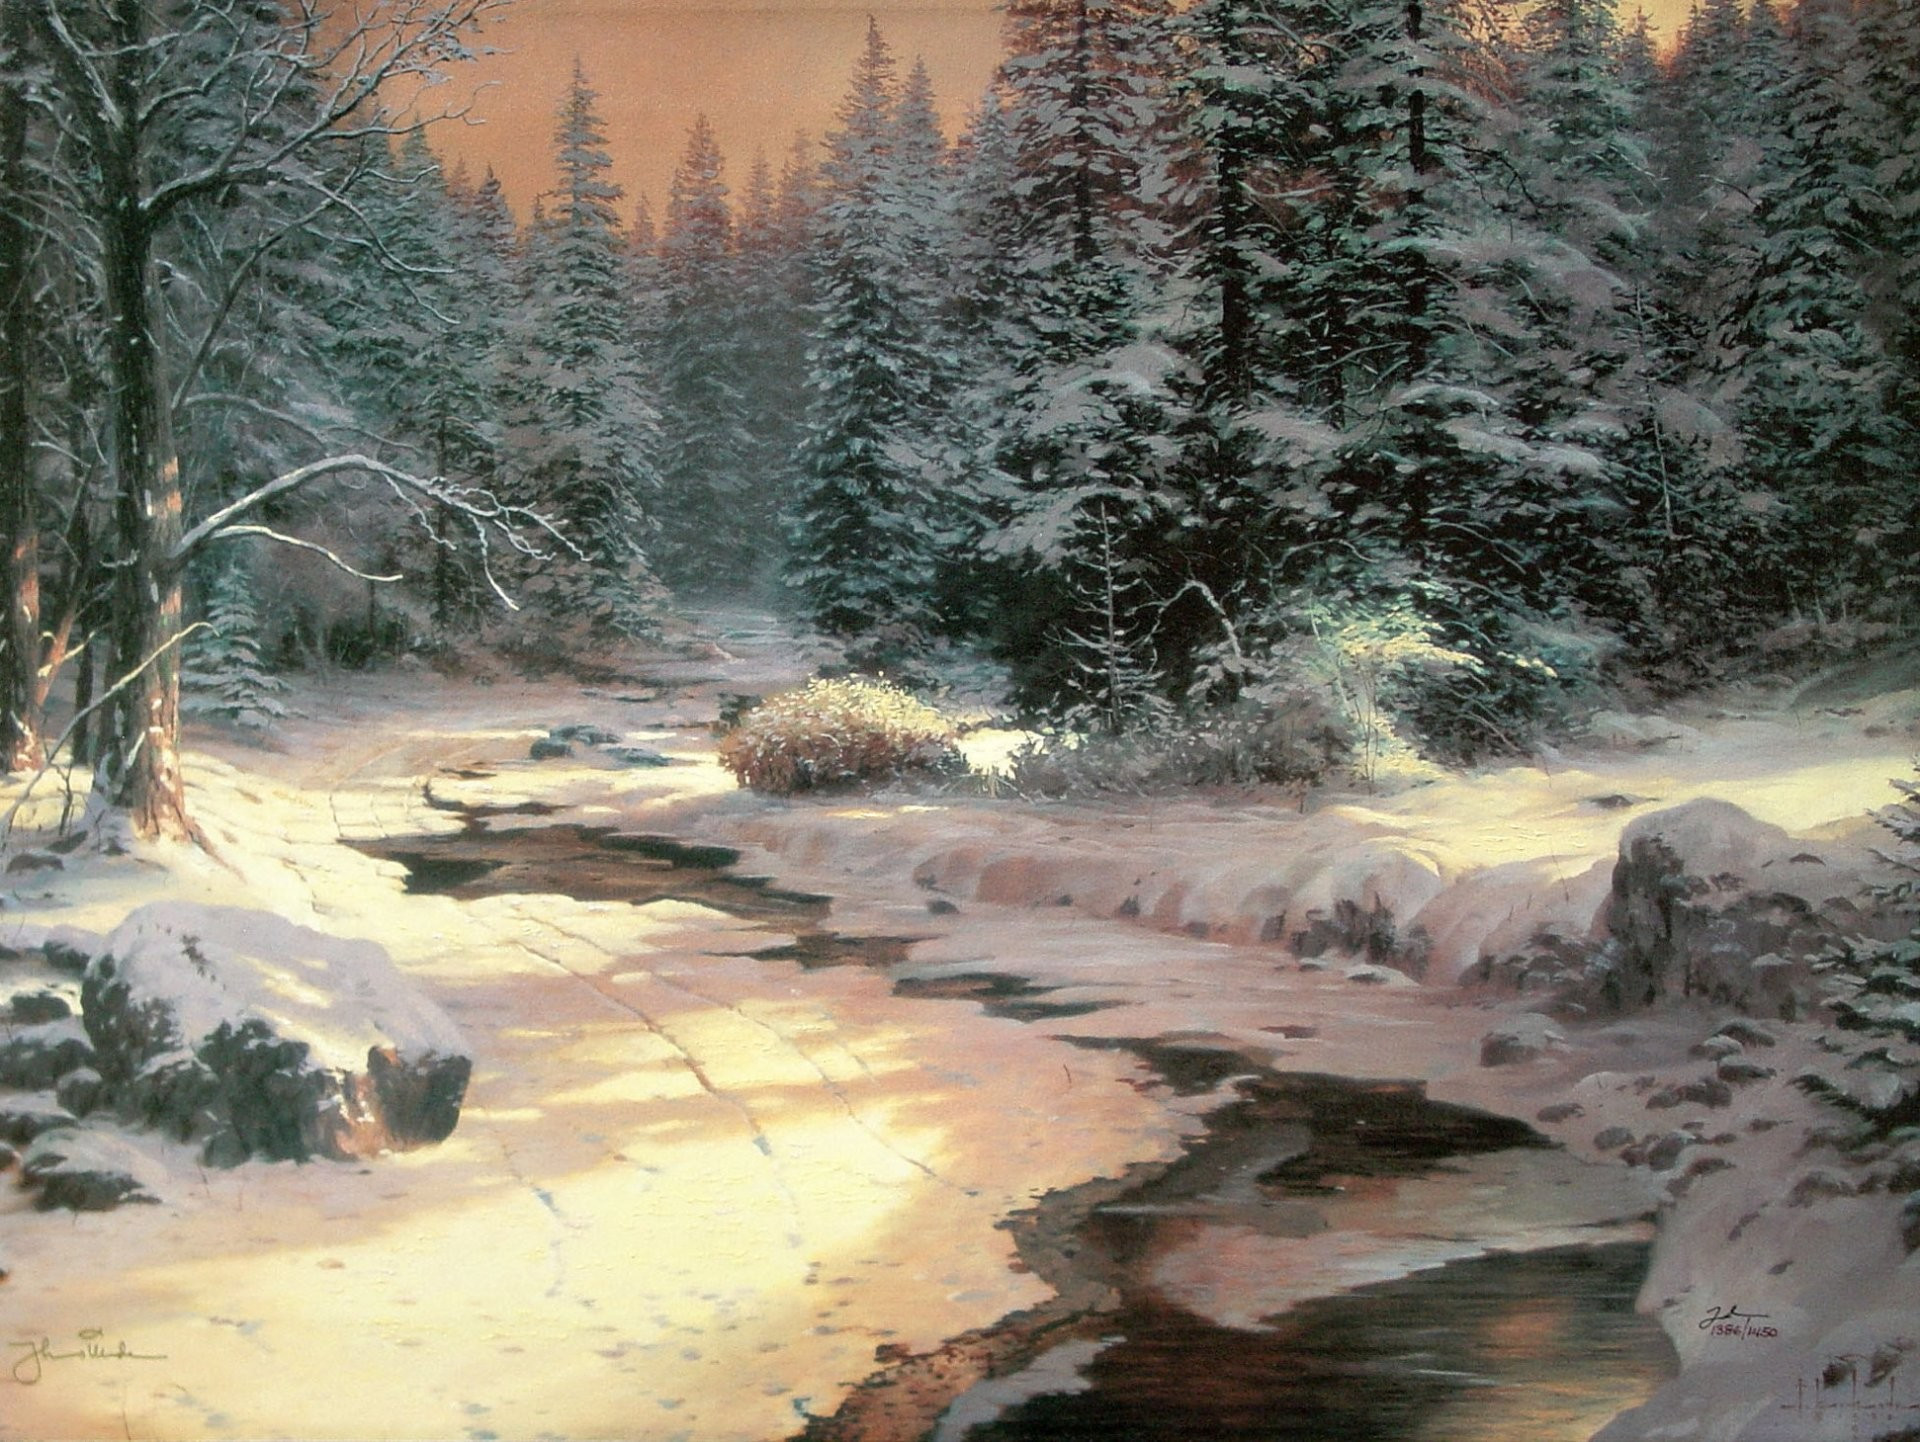 Snowy banks by the river in the woods